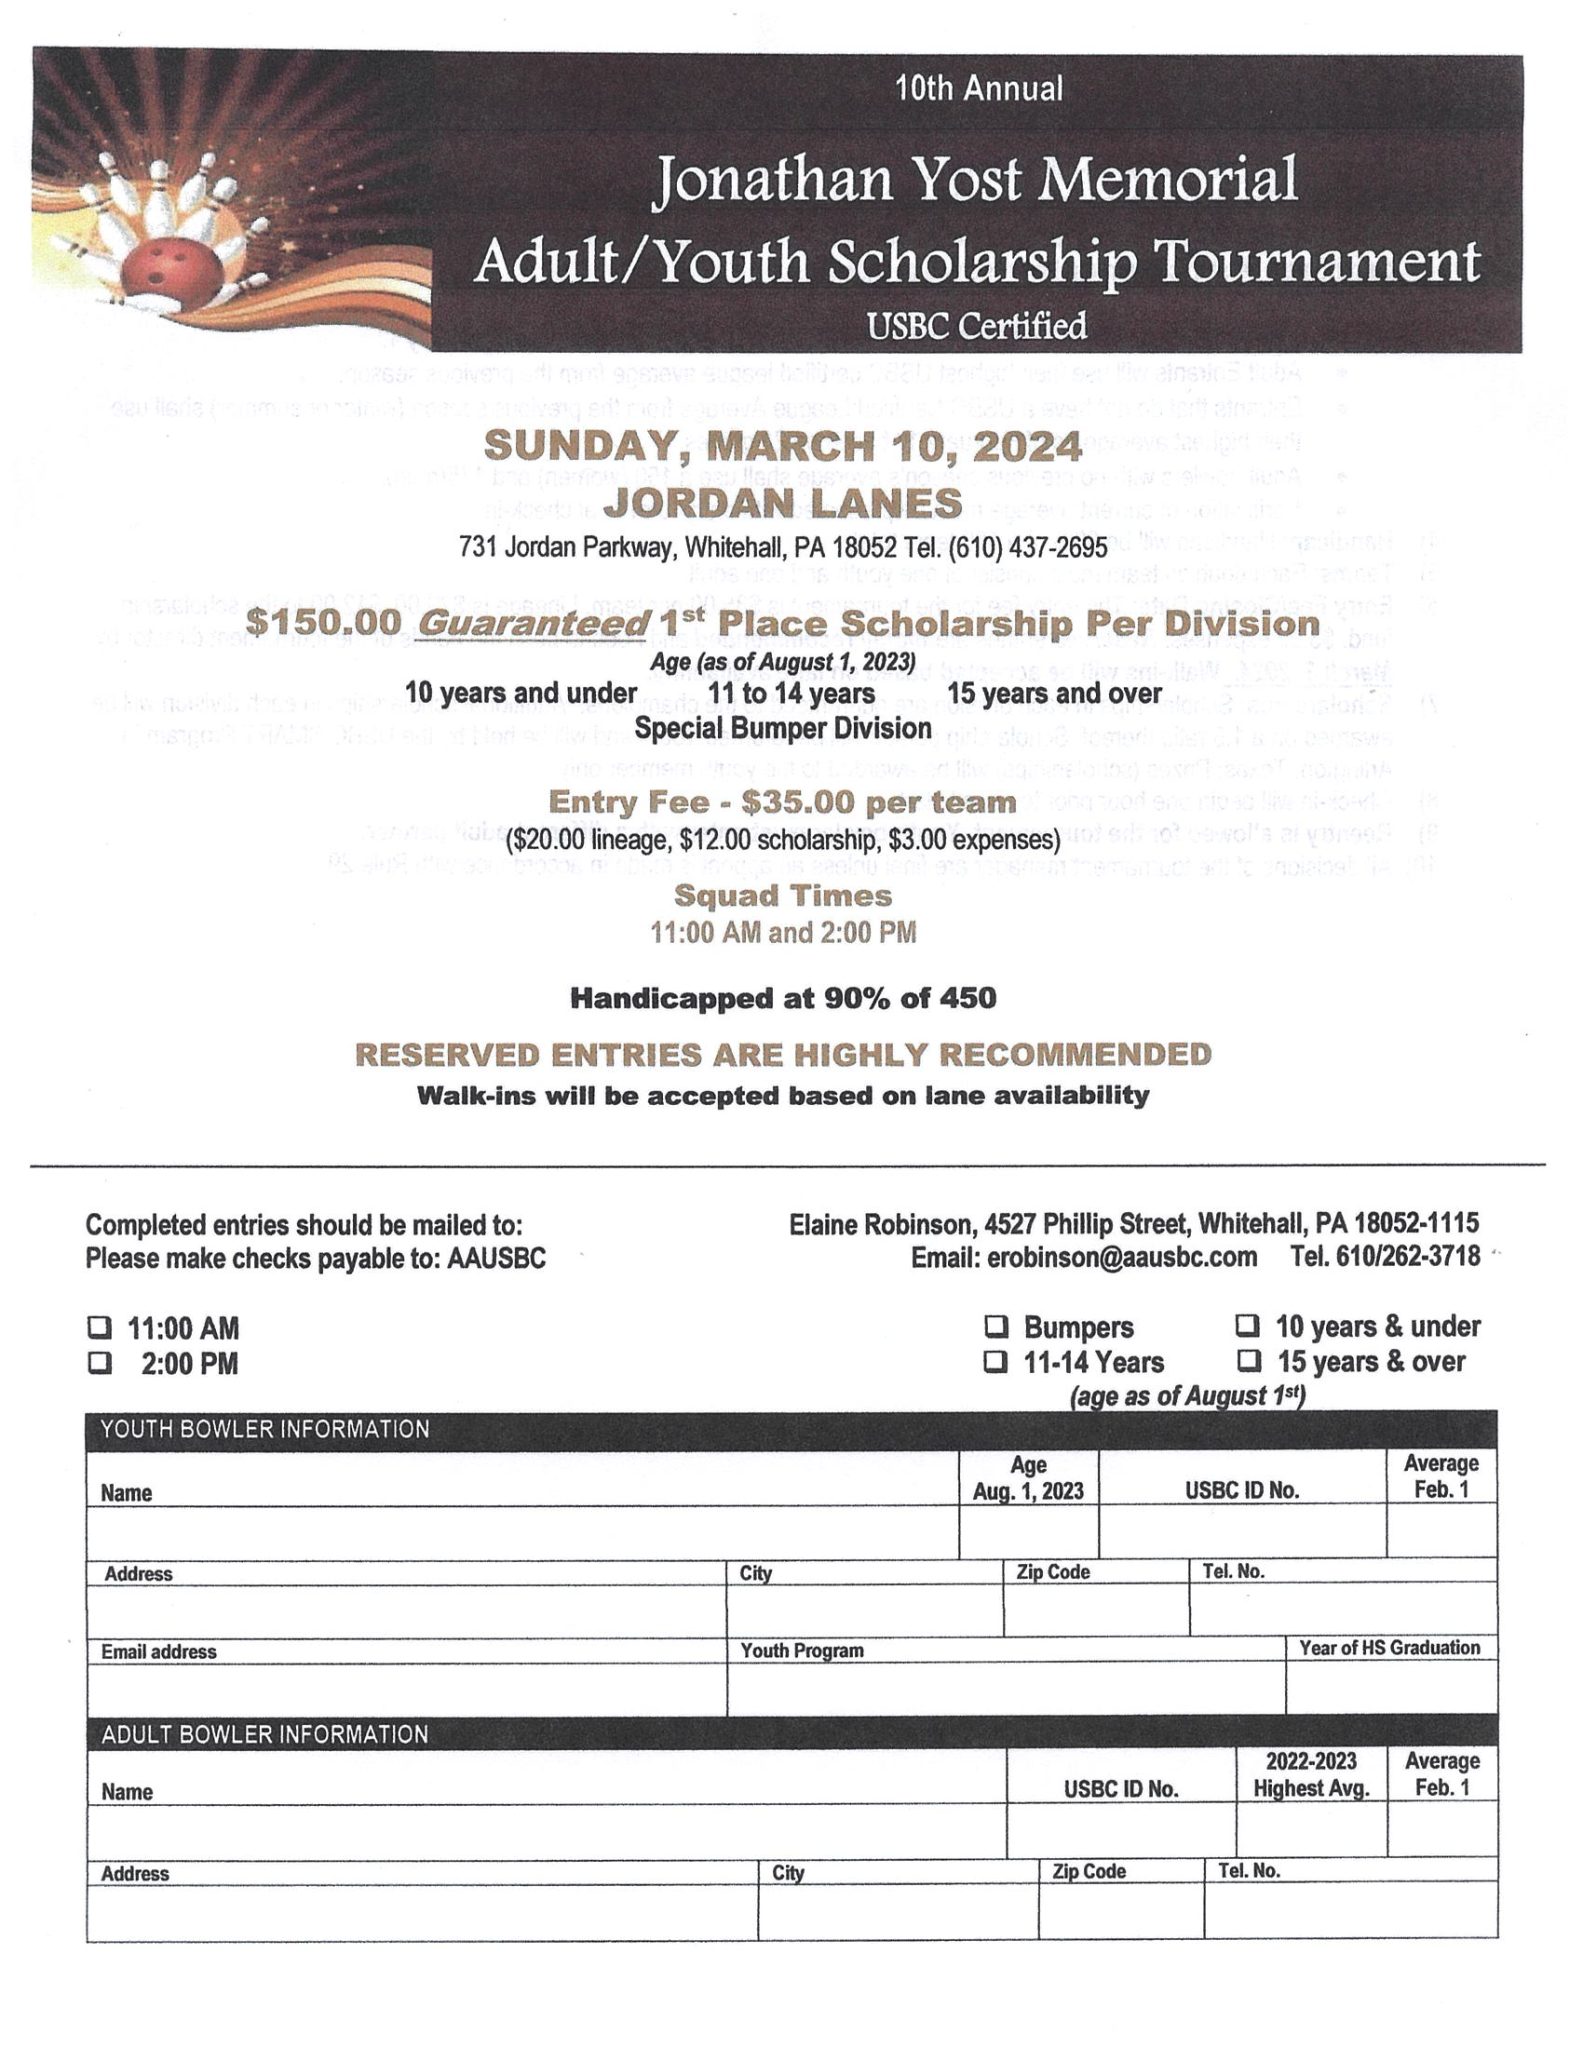 10th Annual Jonathan Yost Memorial Adult / Youth Scholarship Tournament 2